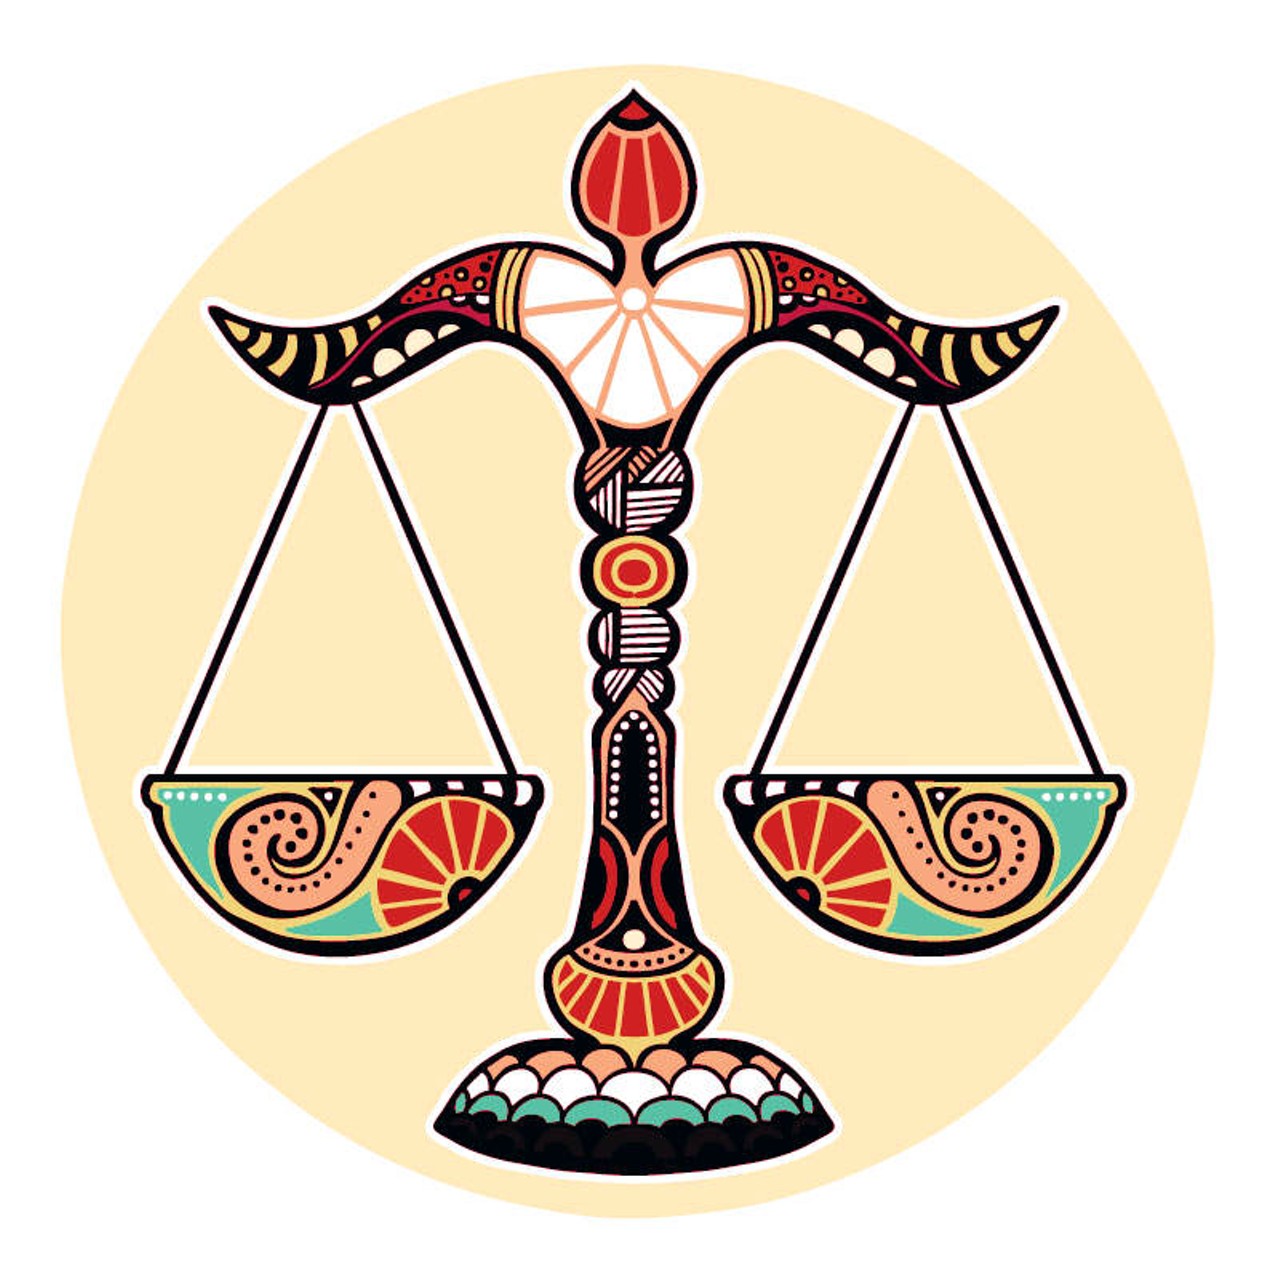 LIBRA: September 21 &#150; October 20
Maybe you are having second thoughts about things that seemed to be flowing smoothly. Your Sixth Sense is telling you to wait and see. As you keep running solutions to your situation around in your head, you try as hard as you can to figure out where they lie. So much of what has been hard up till now is sitting in the cross hairs of change. At a bend in the river everything heads North or South. Your choices matter more than ever. The deeper part of you knows this. Keep your feet on the ground and continue to explore the wealth of possibilities that await you in the distance.